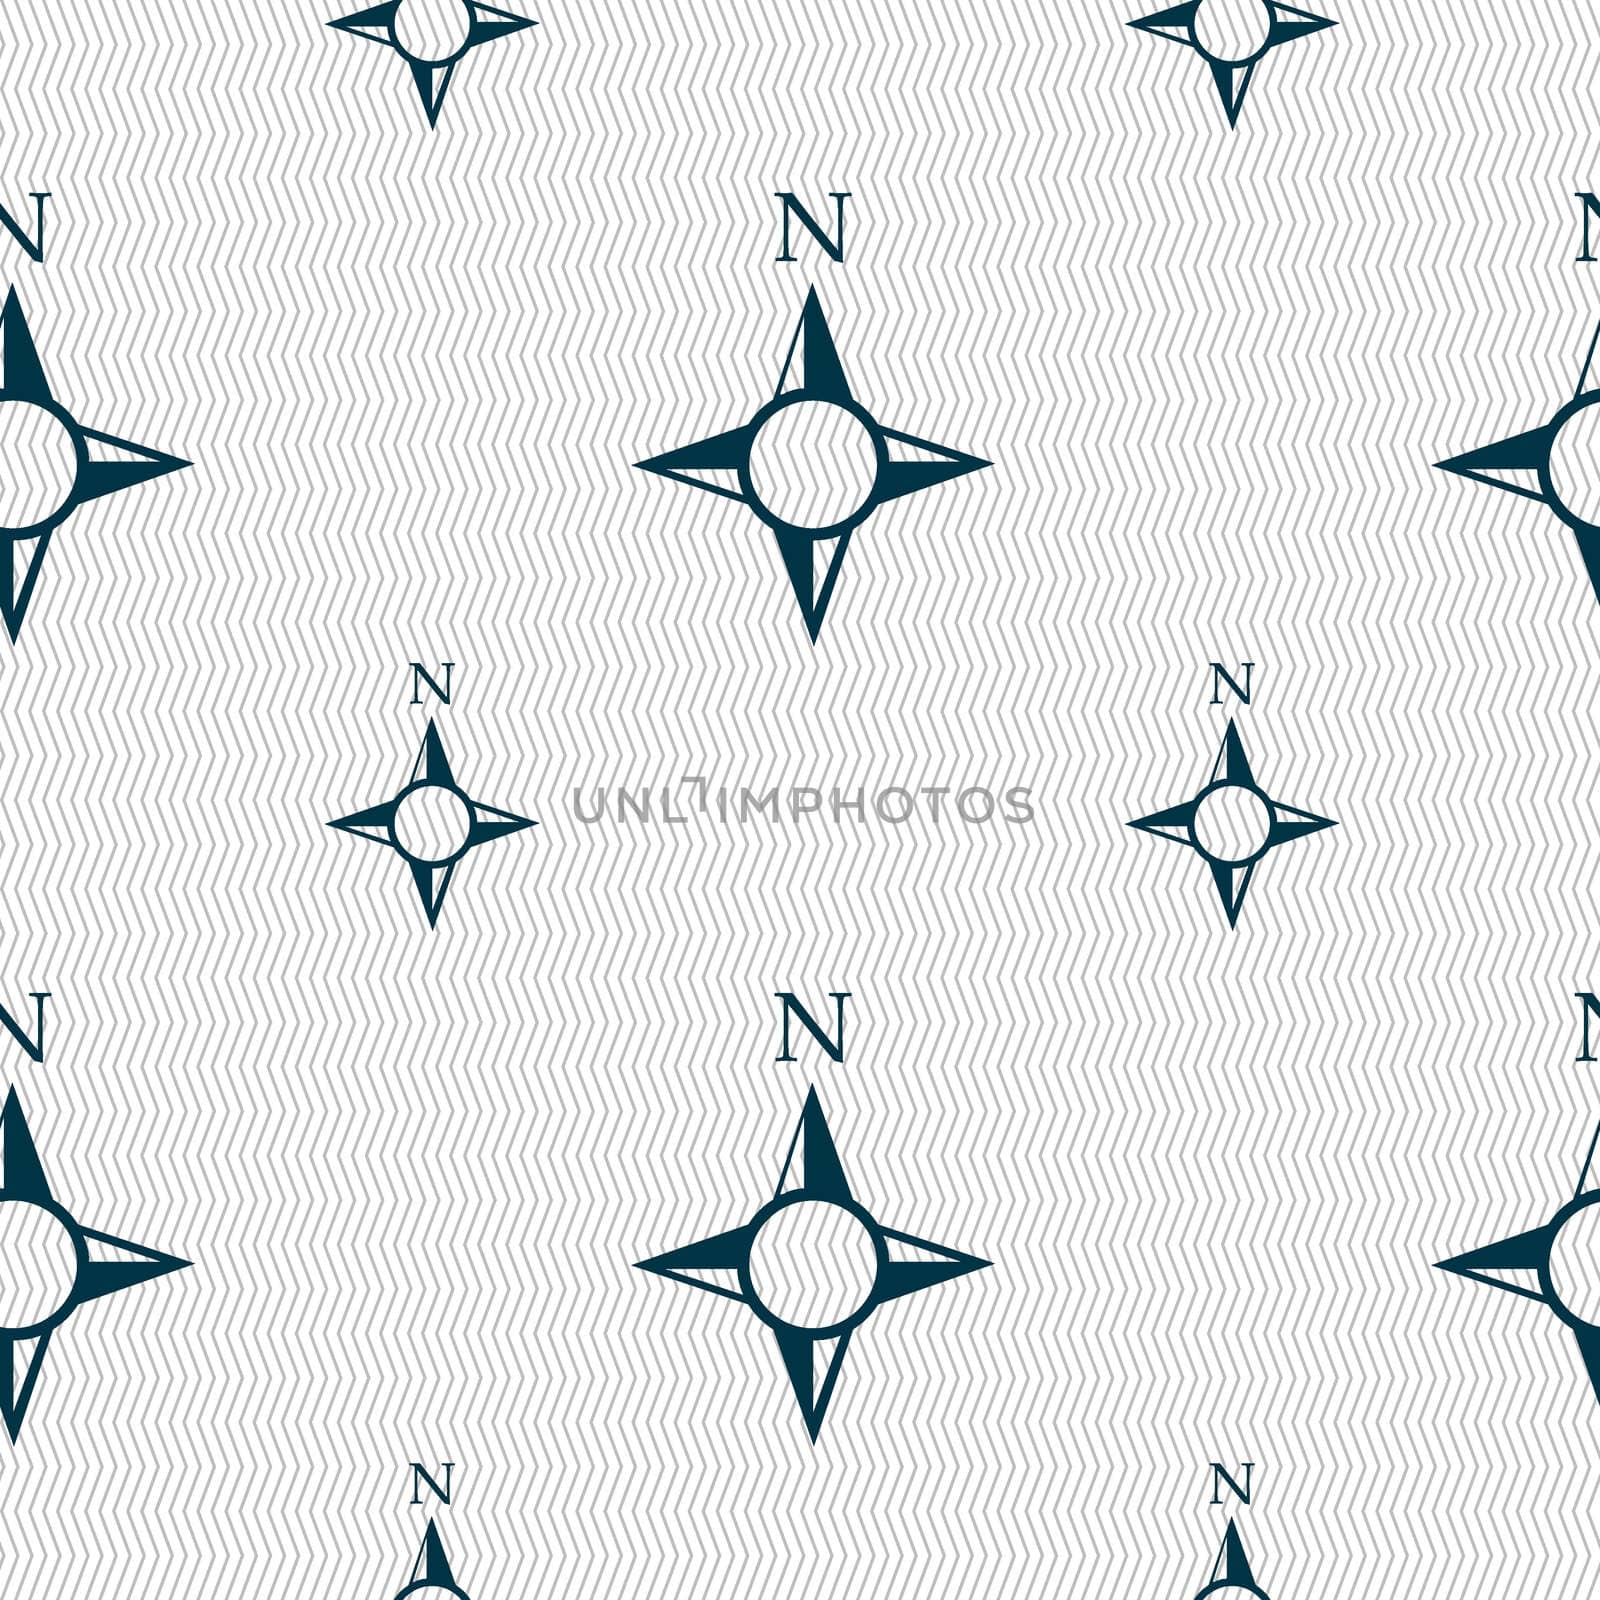 Compass sign icon. Windrose navigation symbol. Seamless pattern with geometric texture. illustration